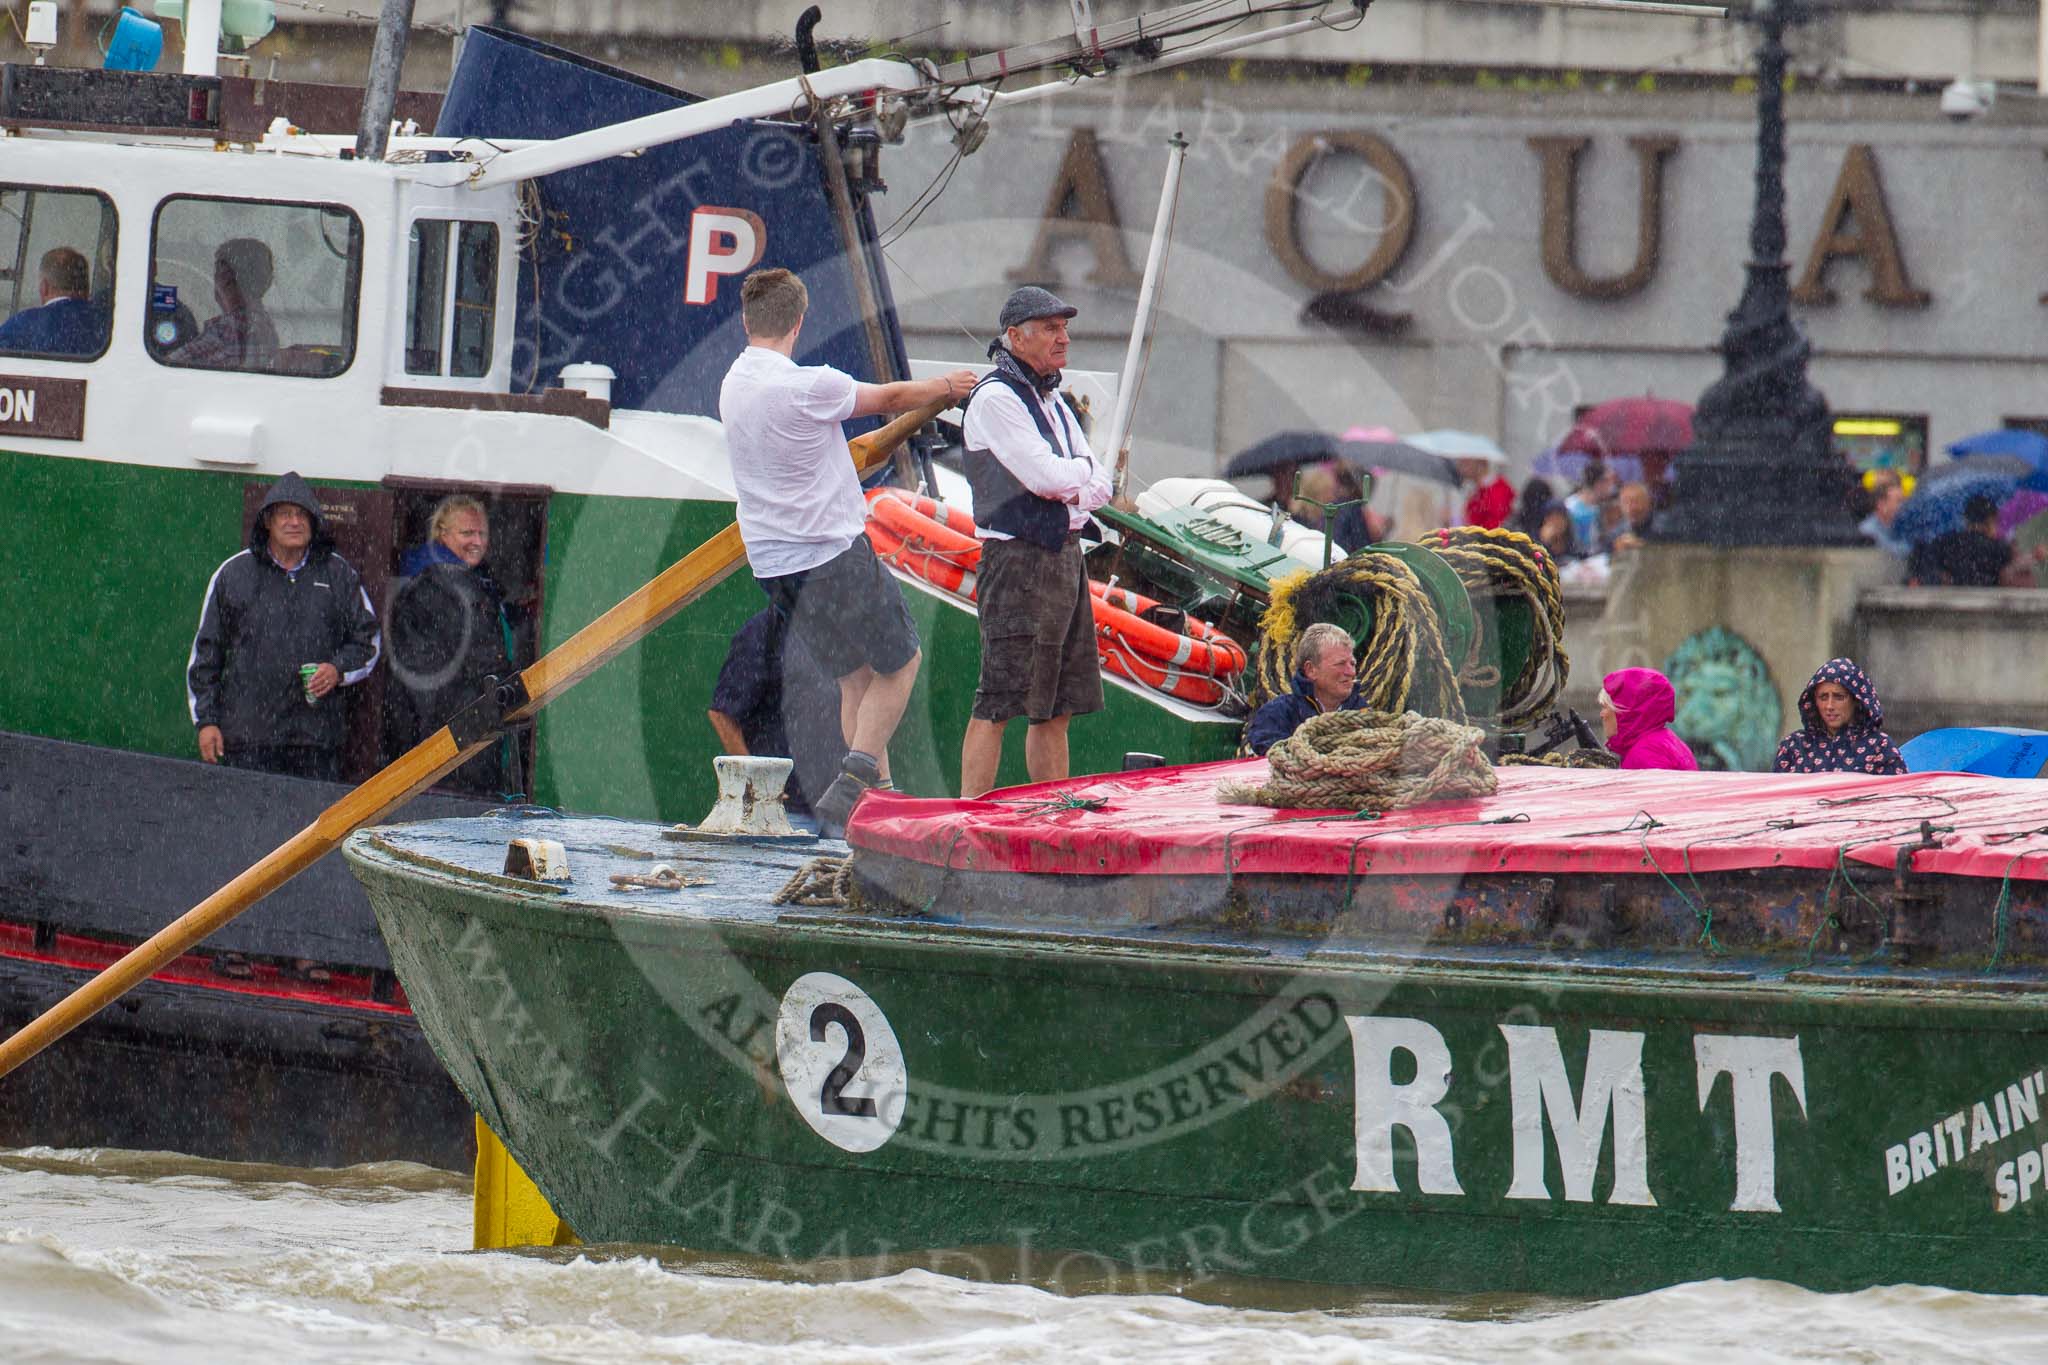 TOW River Thames Barge Driving Race 2014.
River Thames between Greenwich and Westminster,
London,

United Kingdom,
on 28 June 2014 at 14:35, image #425